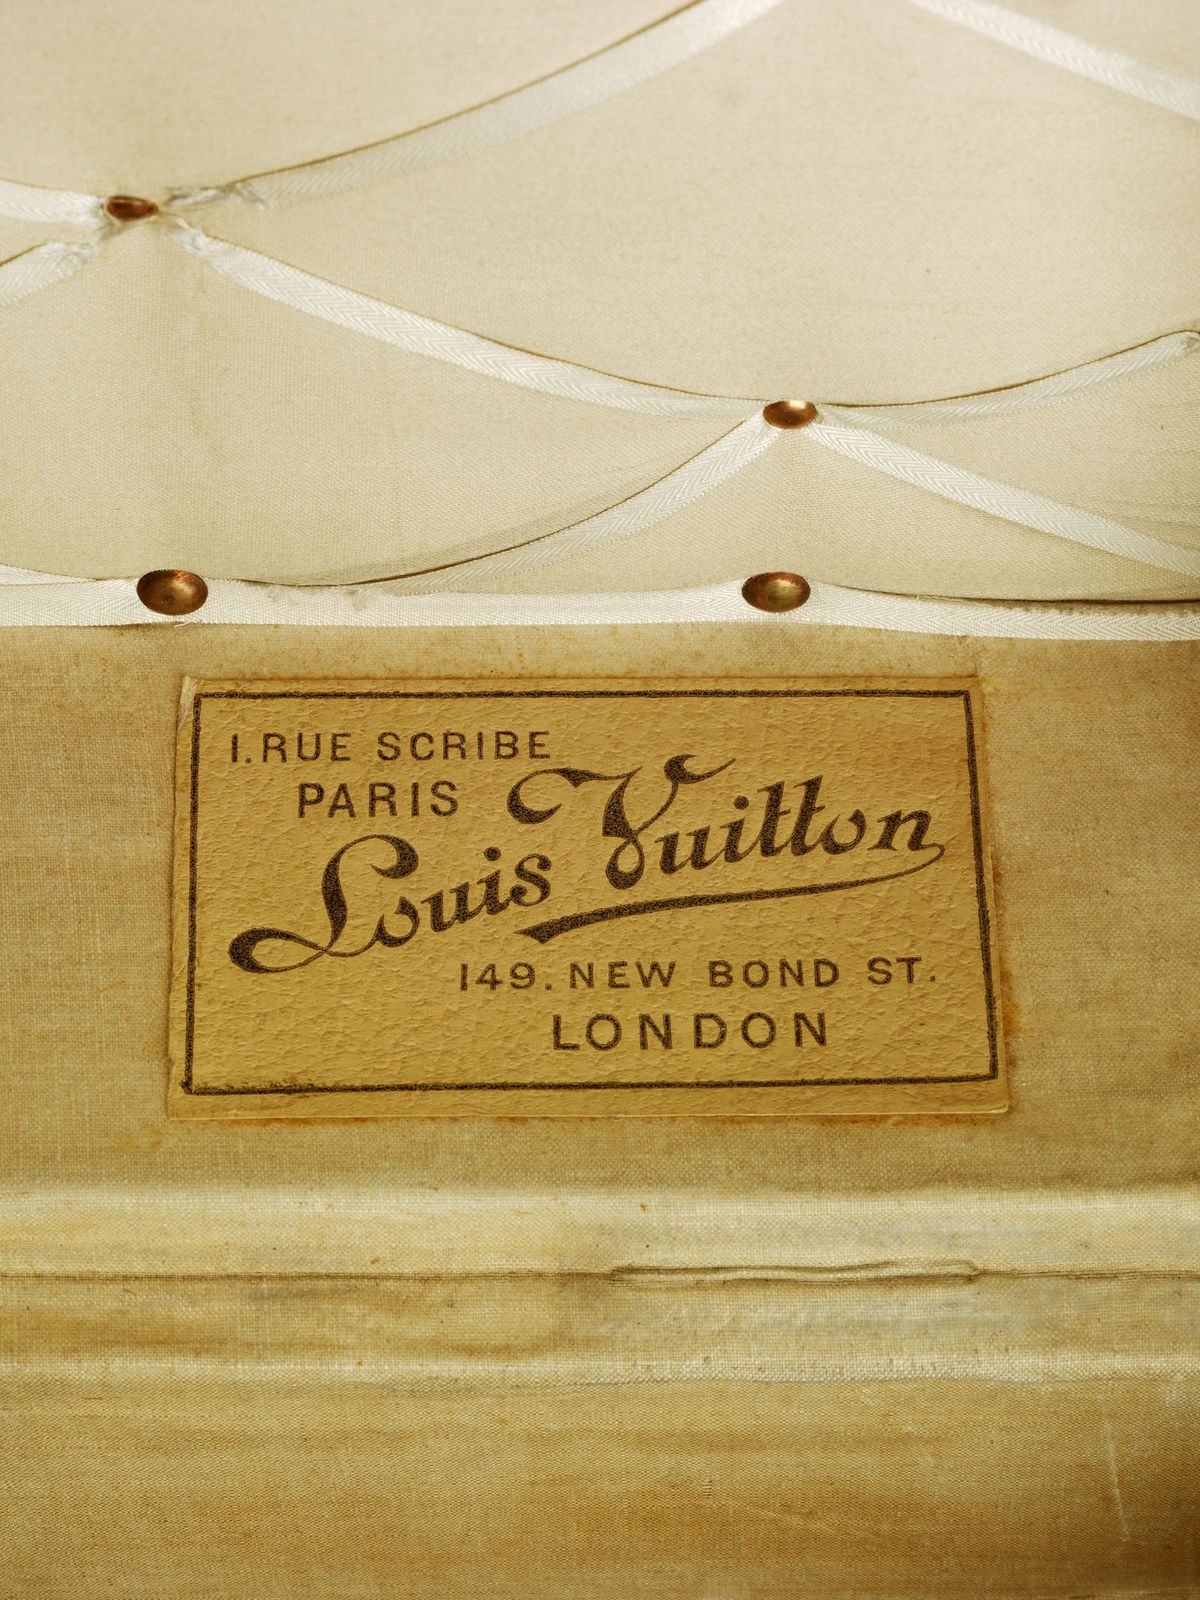 A detail of Emilie Grigsby's Louis Vuitton trunk, which travelled the world with her in the first half of the 20th century Photo: courtesy of the Victoria and Albert Museum